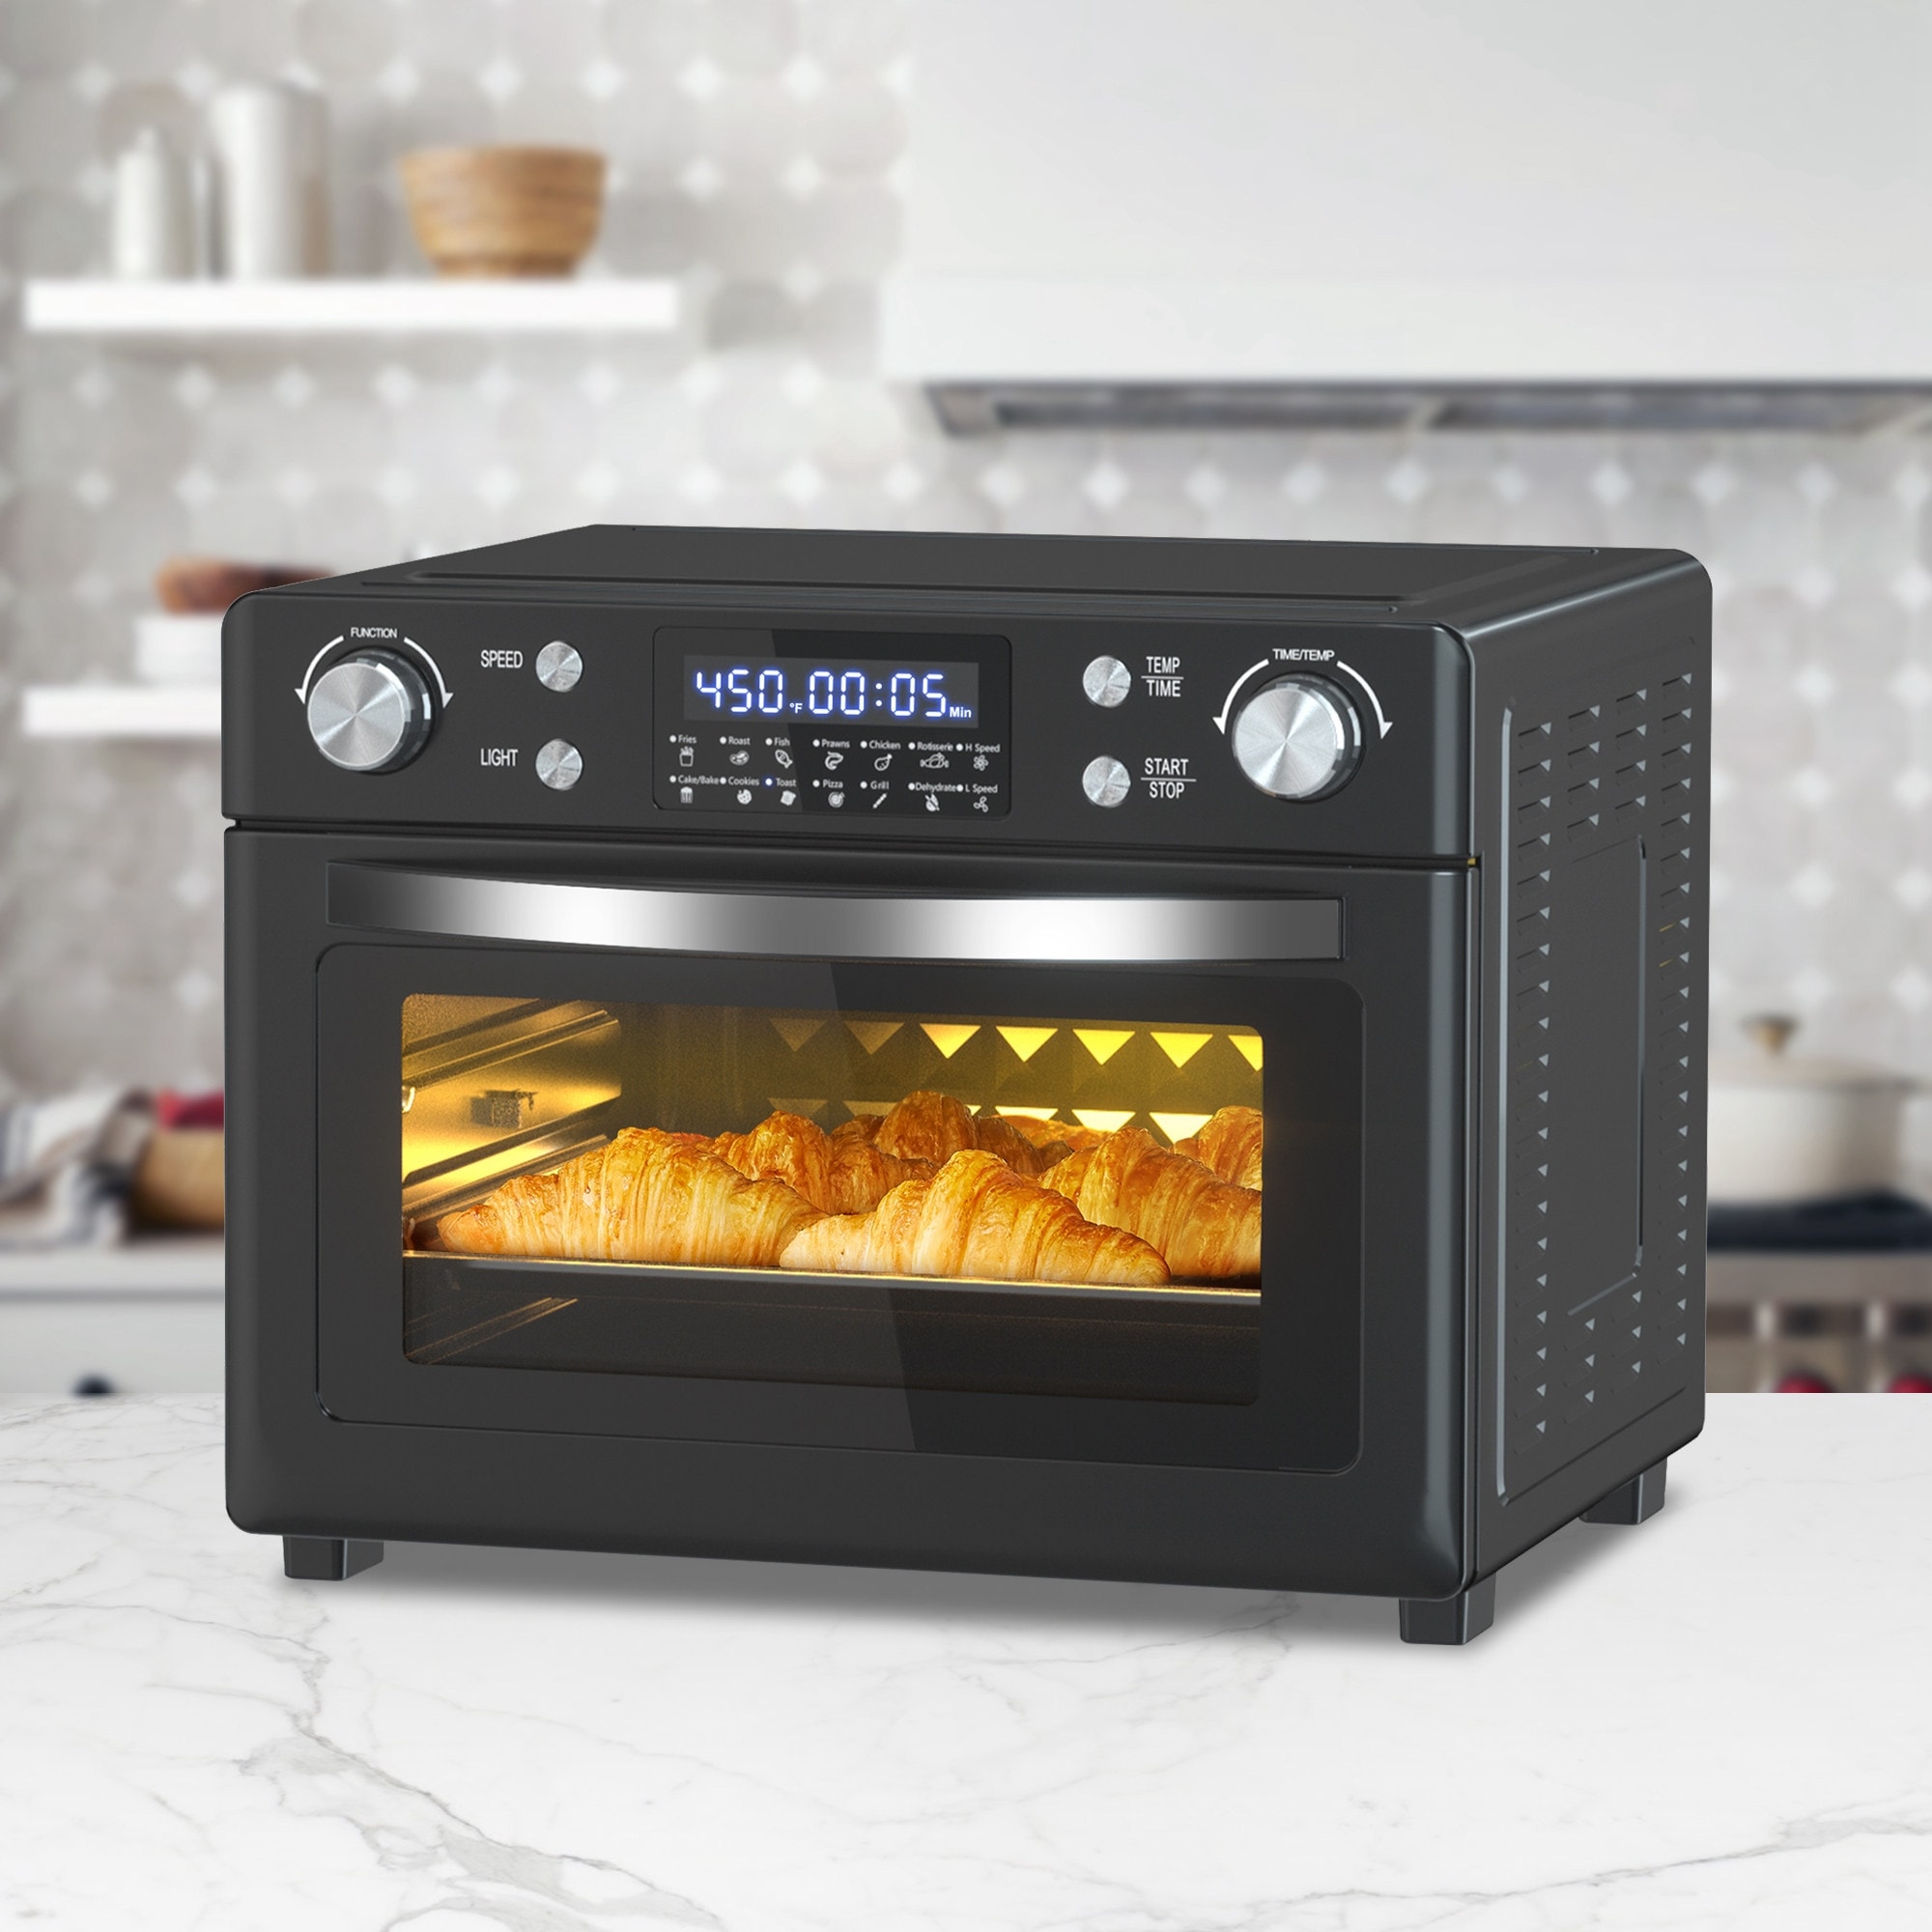 Danby 0.9 cu. ft. Toaster Oven with Air Fry Technology in